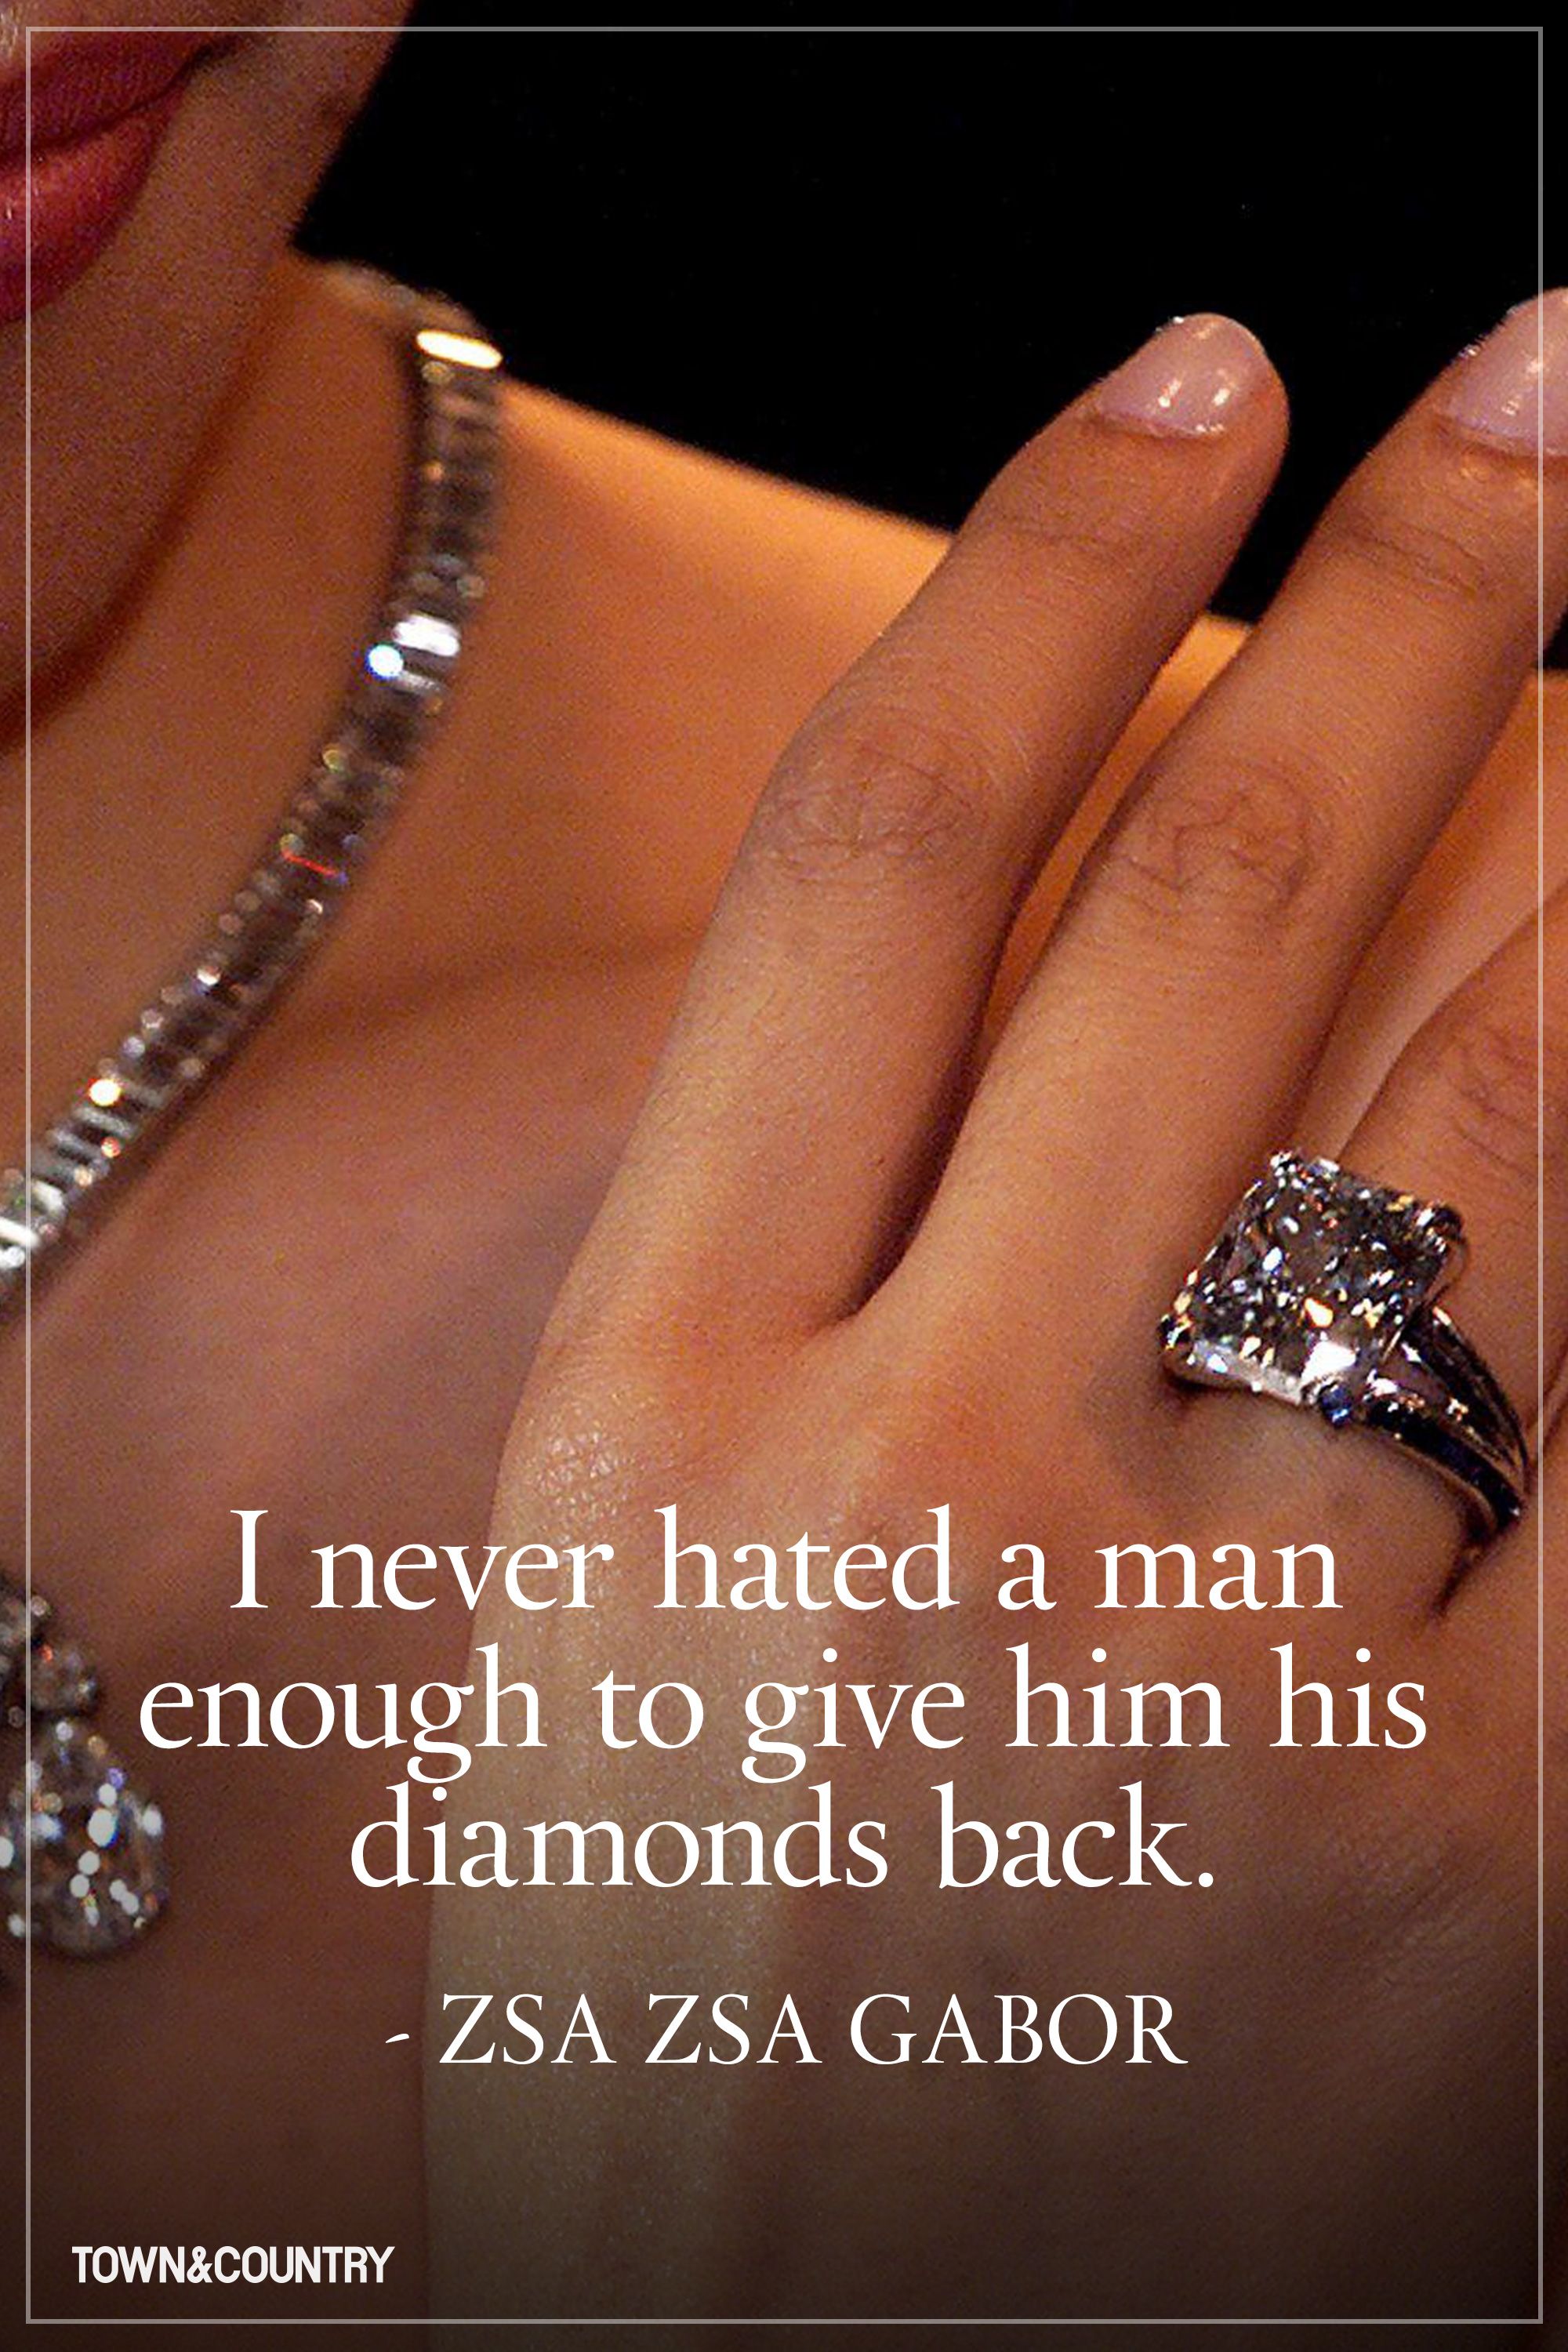 10 Quotes Every Jewelry Lover Needs to 